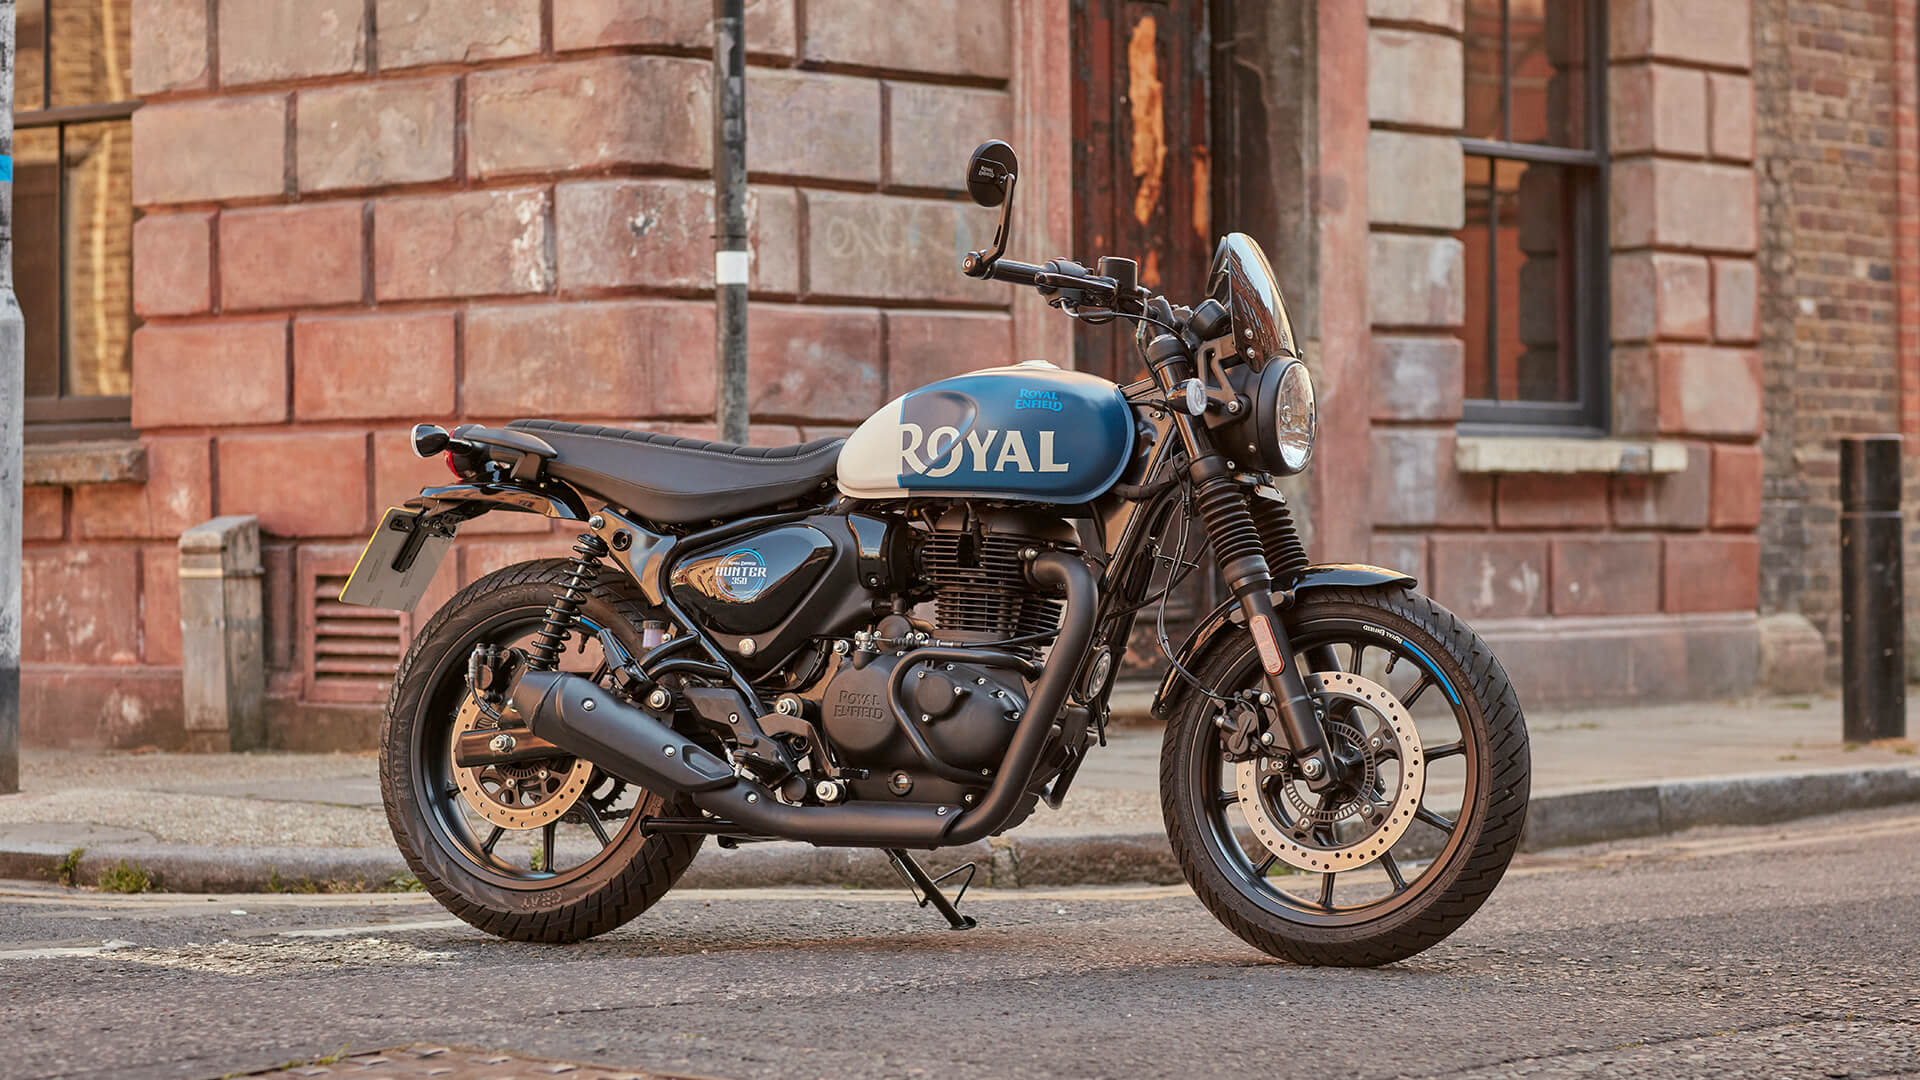 Royal Enfield Hunter 350: Compact city roadster launched in Nepal at a competitive price